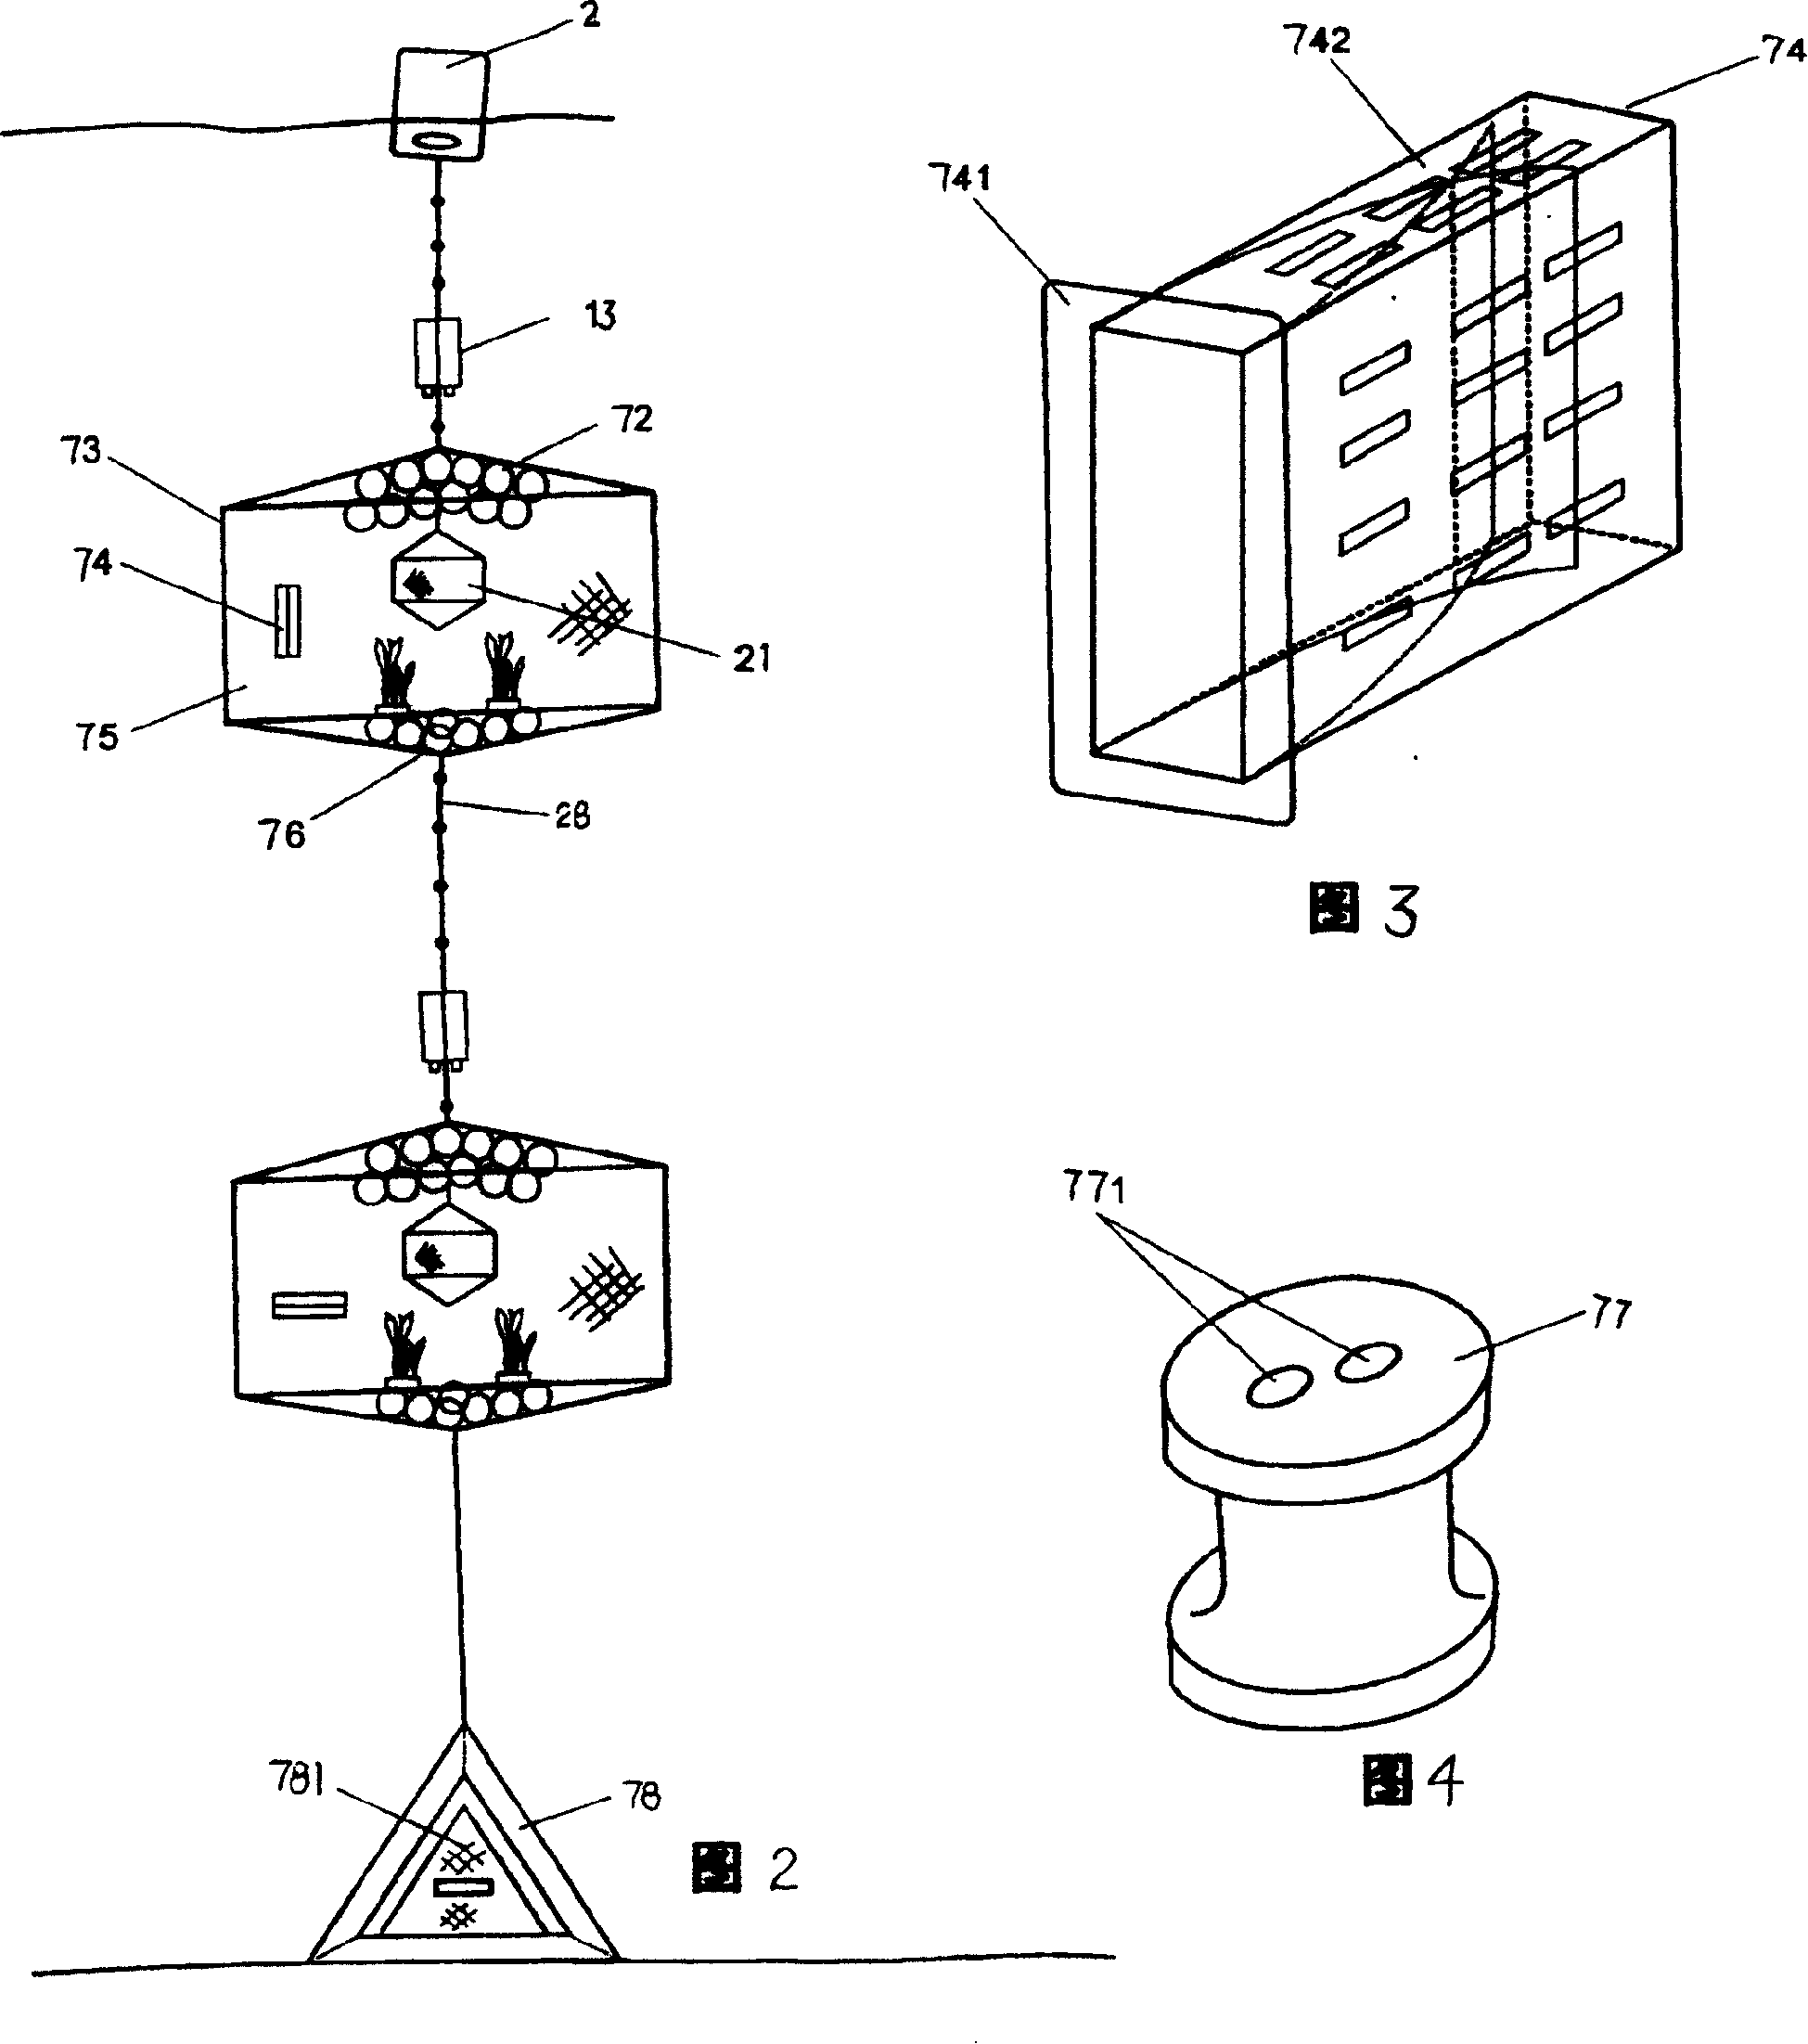 Complex sea product cultivating system